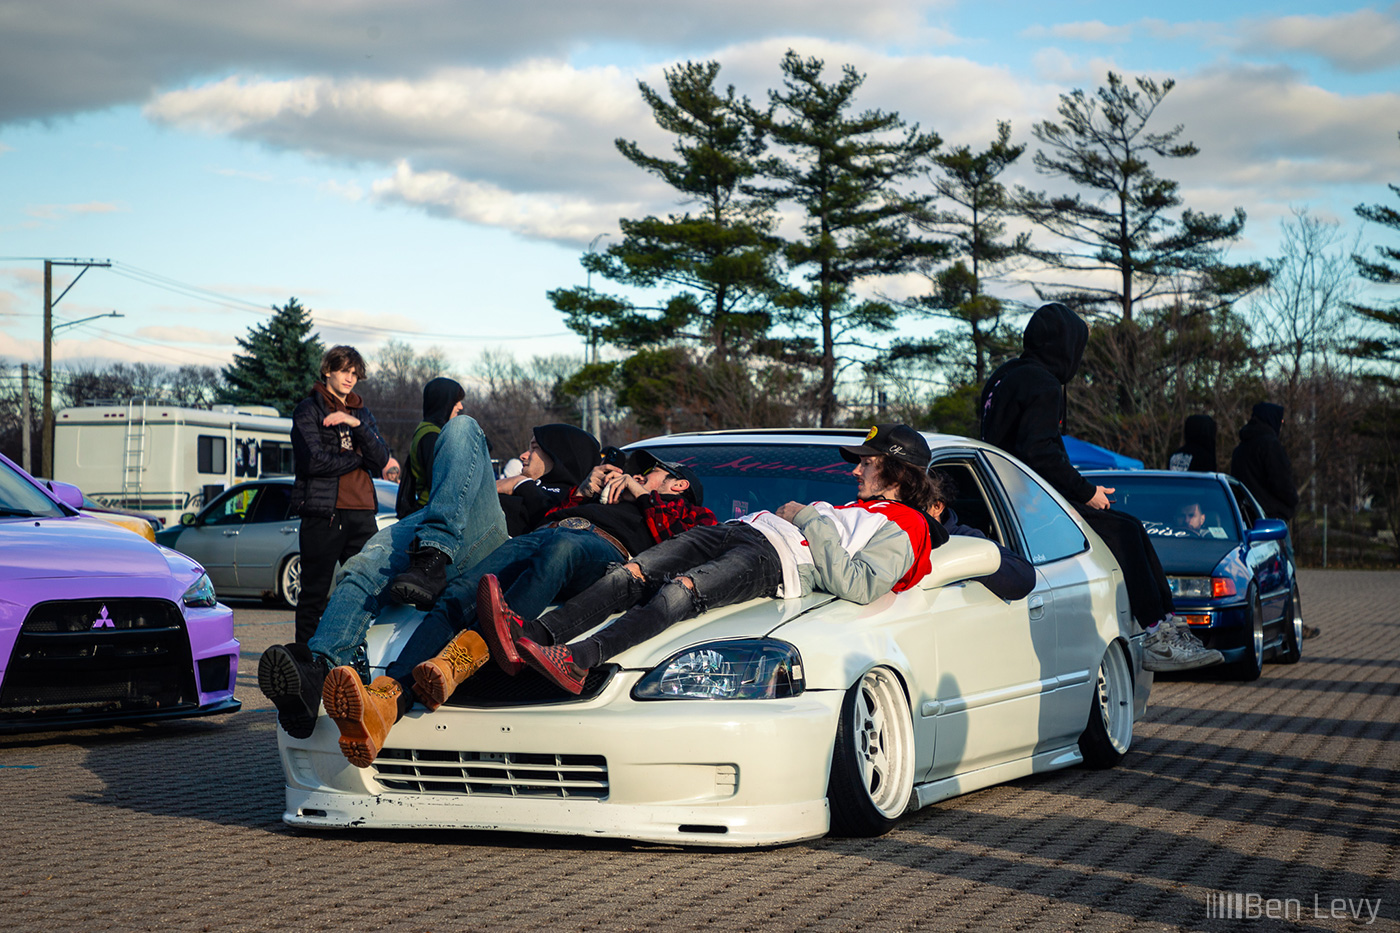 Laying on a Civic For Low Car Limbo